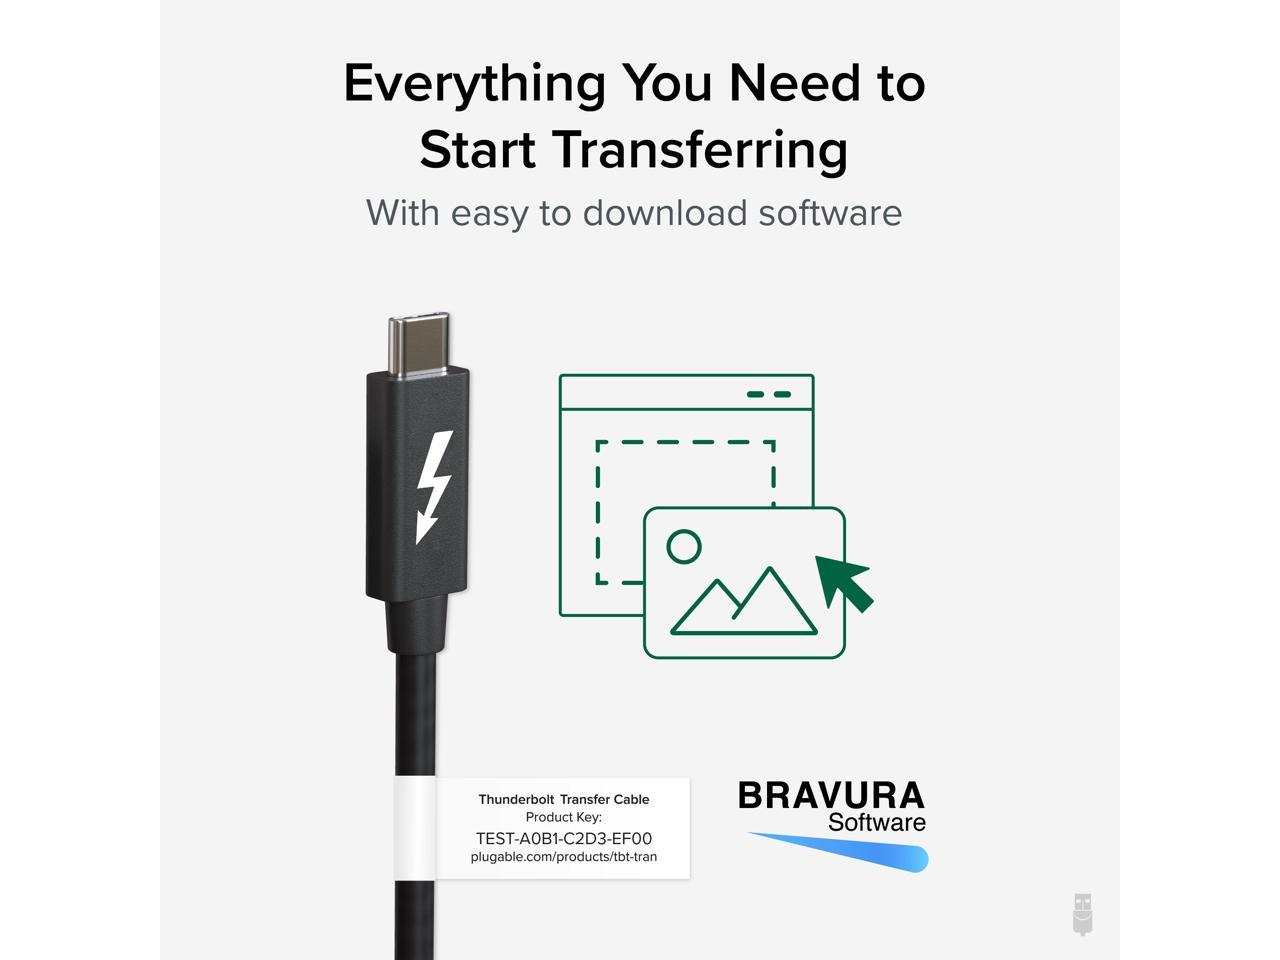 Plugable Windows Transfer Cable 6.6ft (2m), Thunderbolt 10Gbps, Bundled with Bravura Software for Windows PC to PC Migration - Unlimited Uses. Works between Thunderbolt 3 / 4, USB4 PCs - image 4 of 13